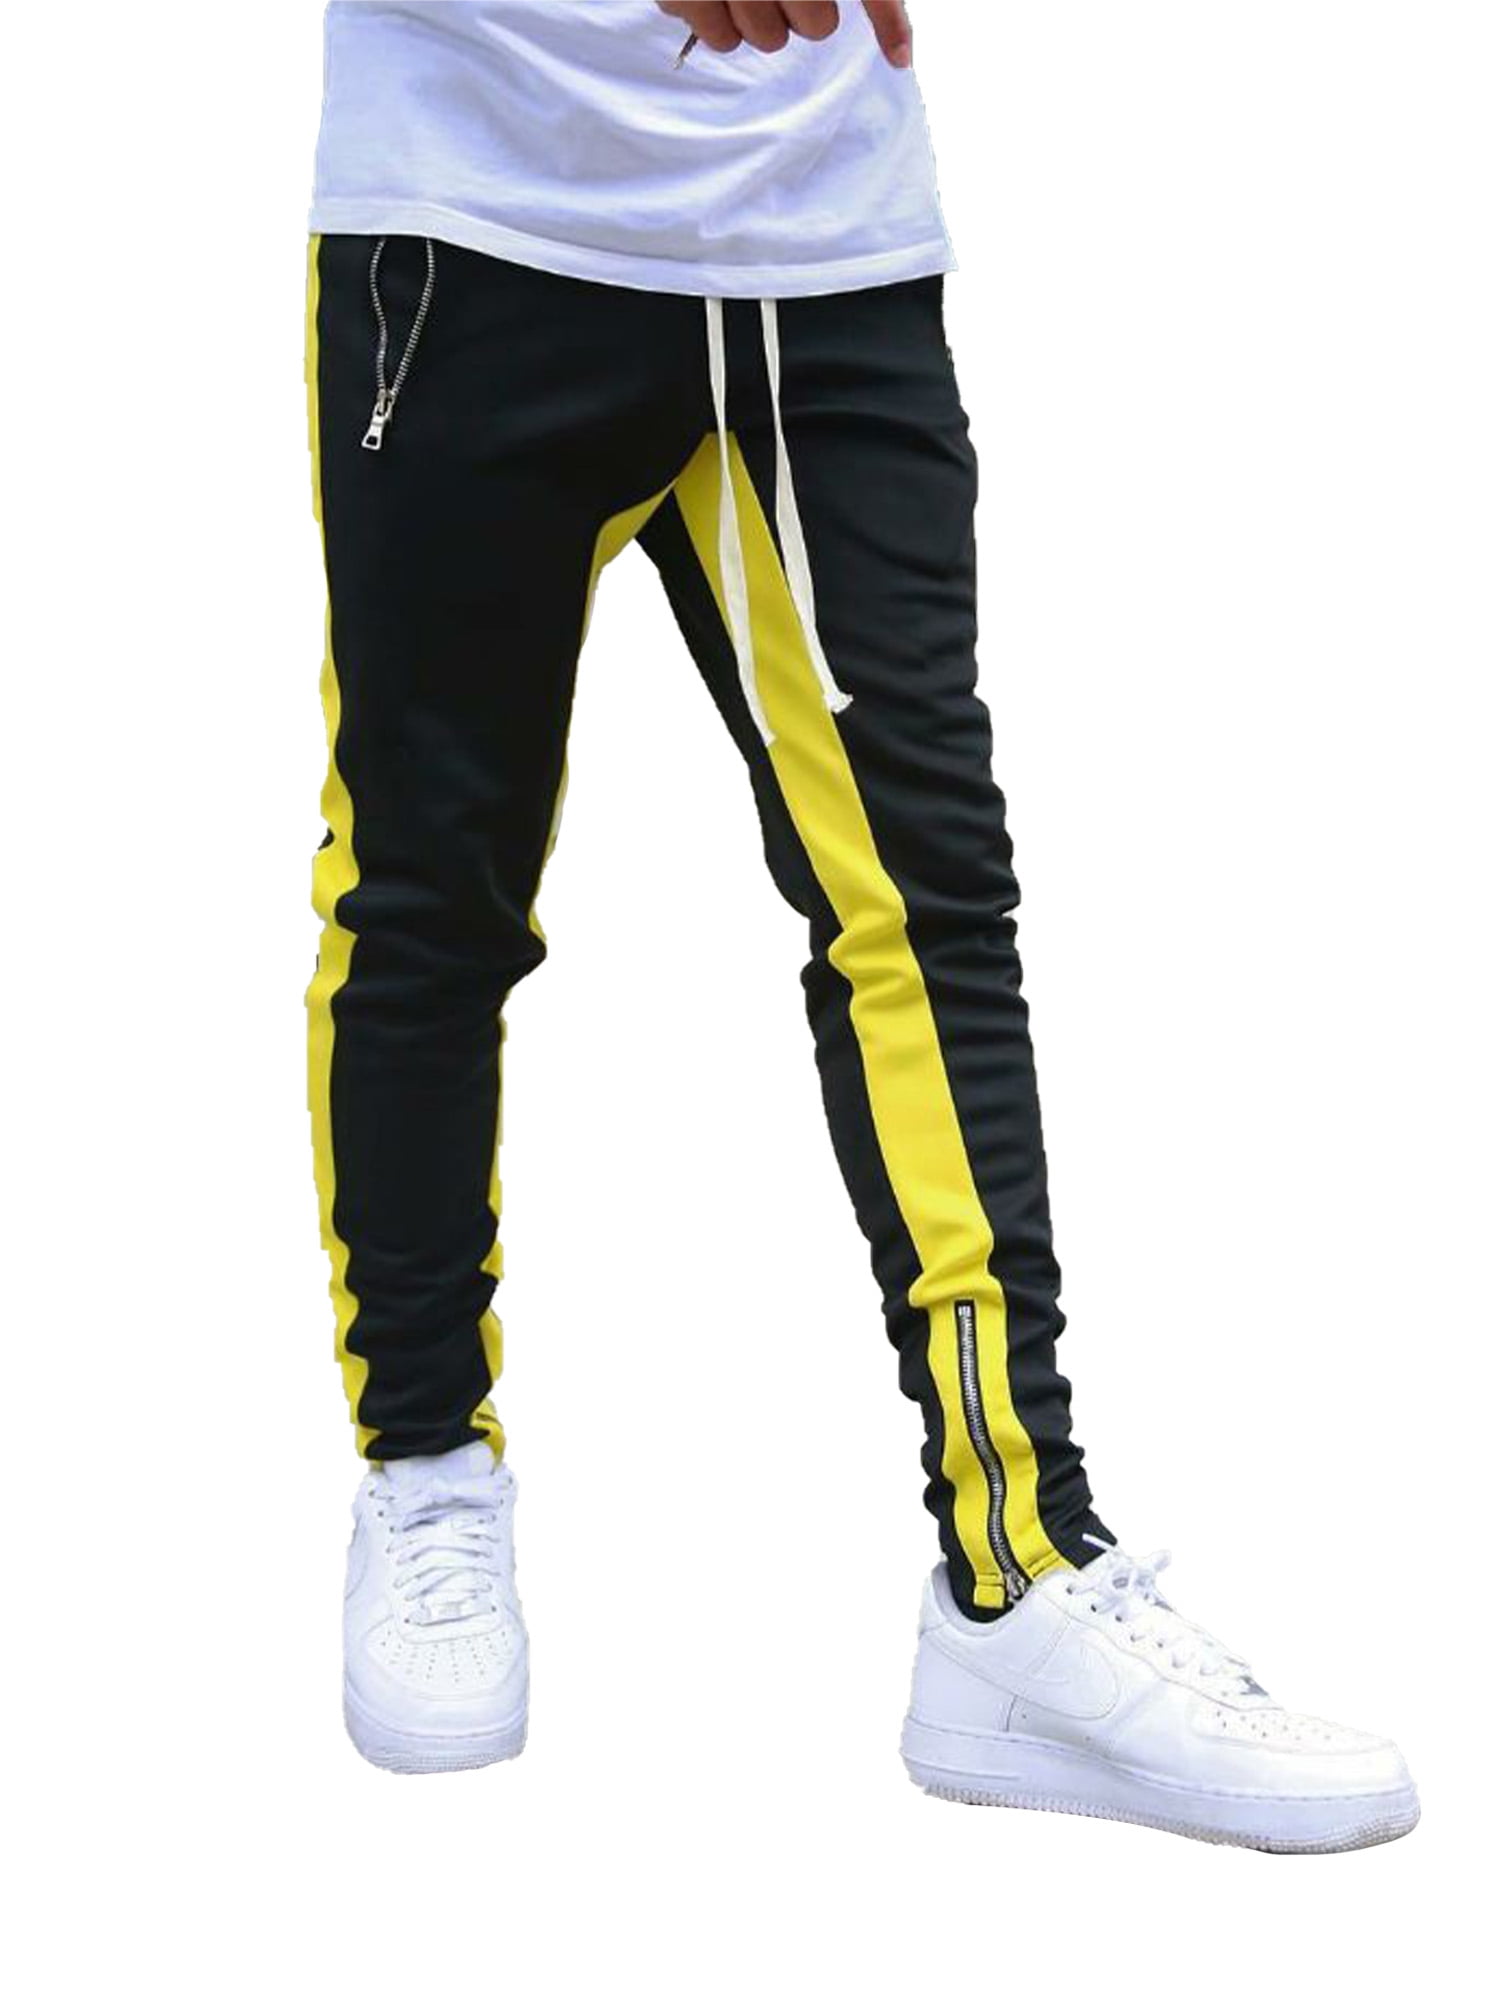 Mens Fashion Zip Pants with Side Taping Male Teen Boys Hip Hop Jogger  Patchwork Sport Sweatpants Track Pants Trousers 